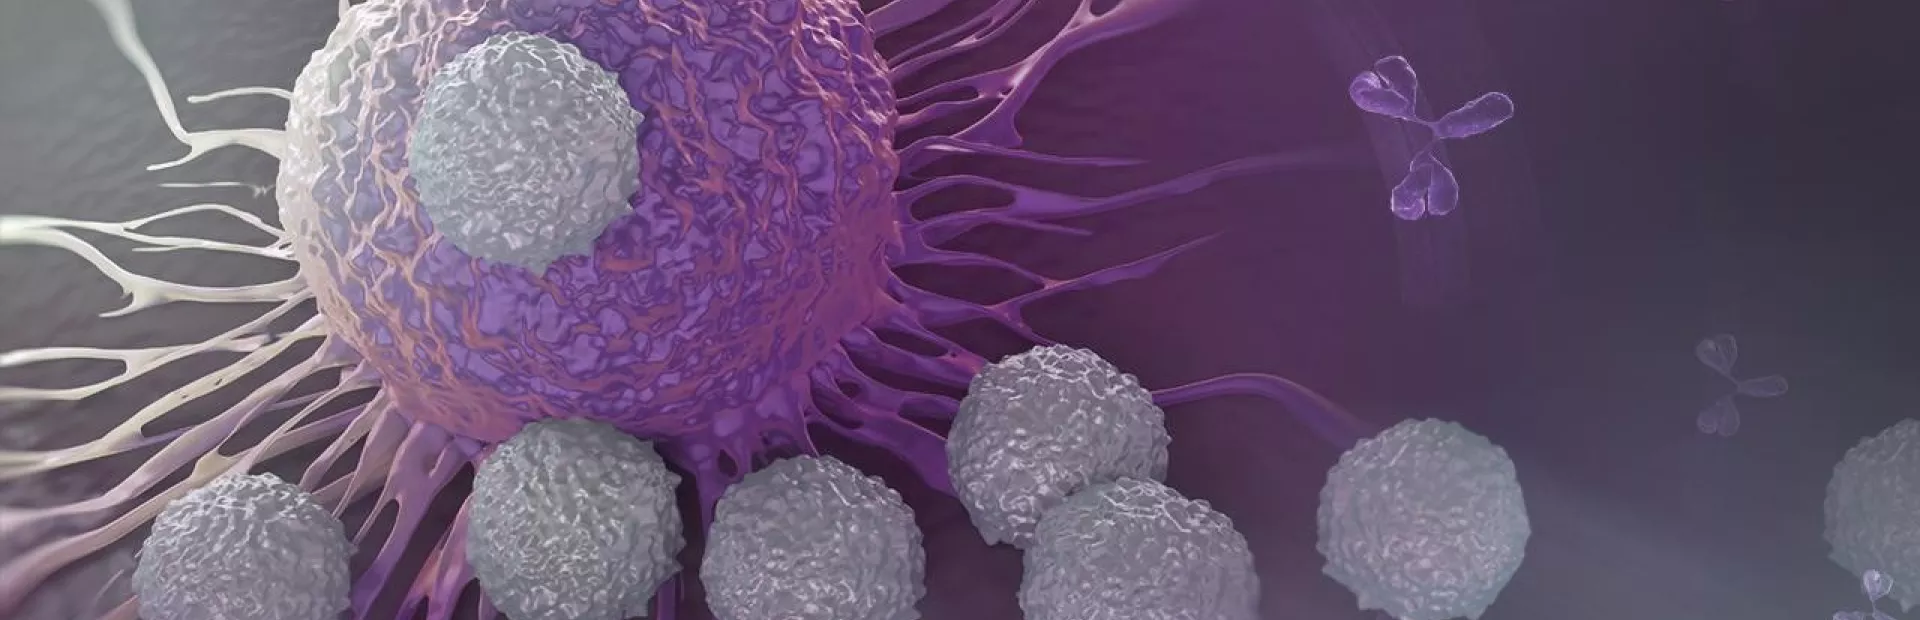 How scientists aim to expand immunotherapy options for cancer patients